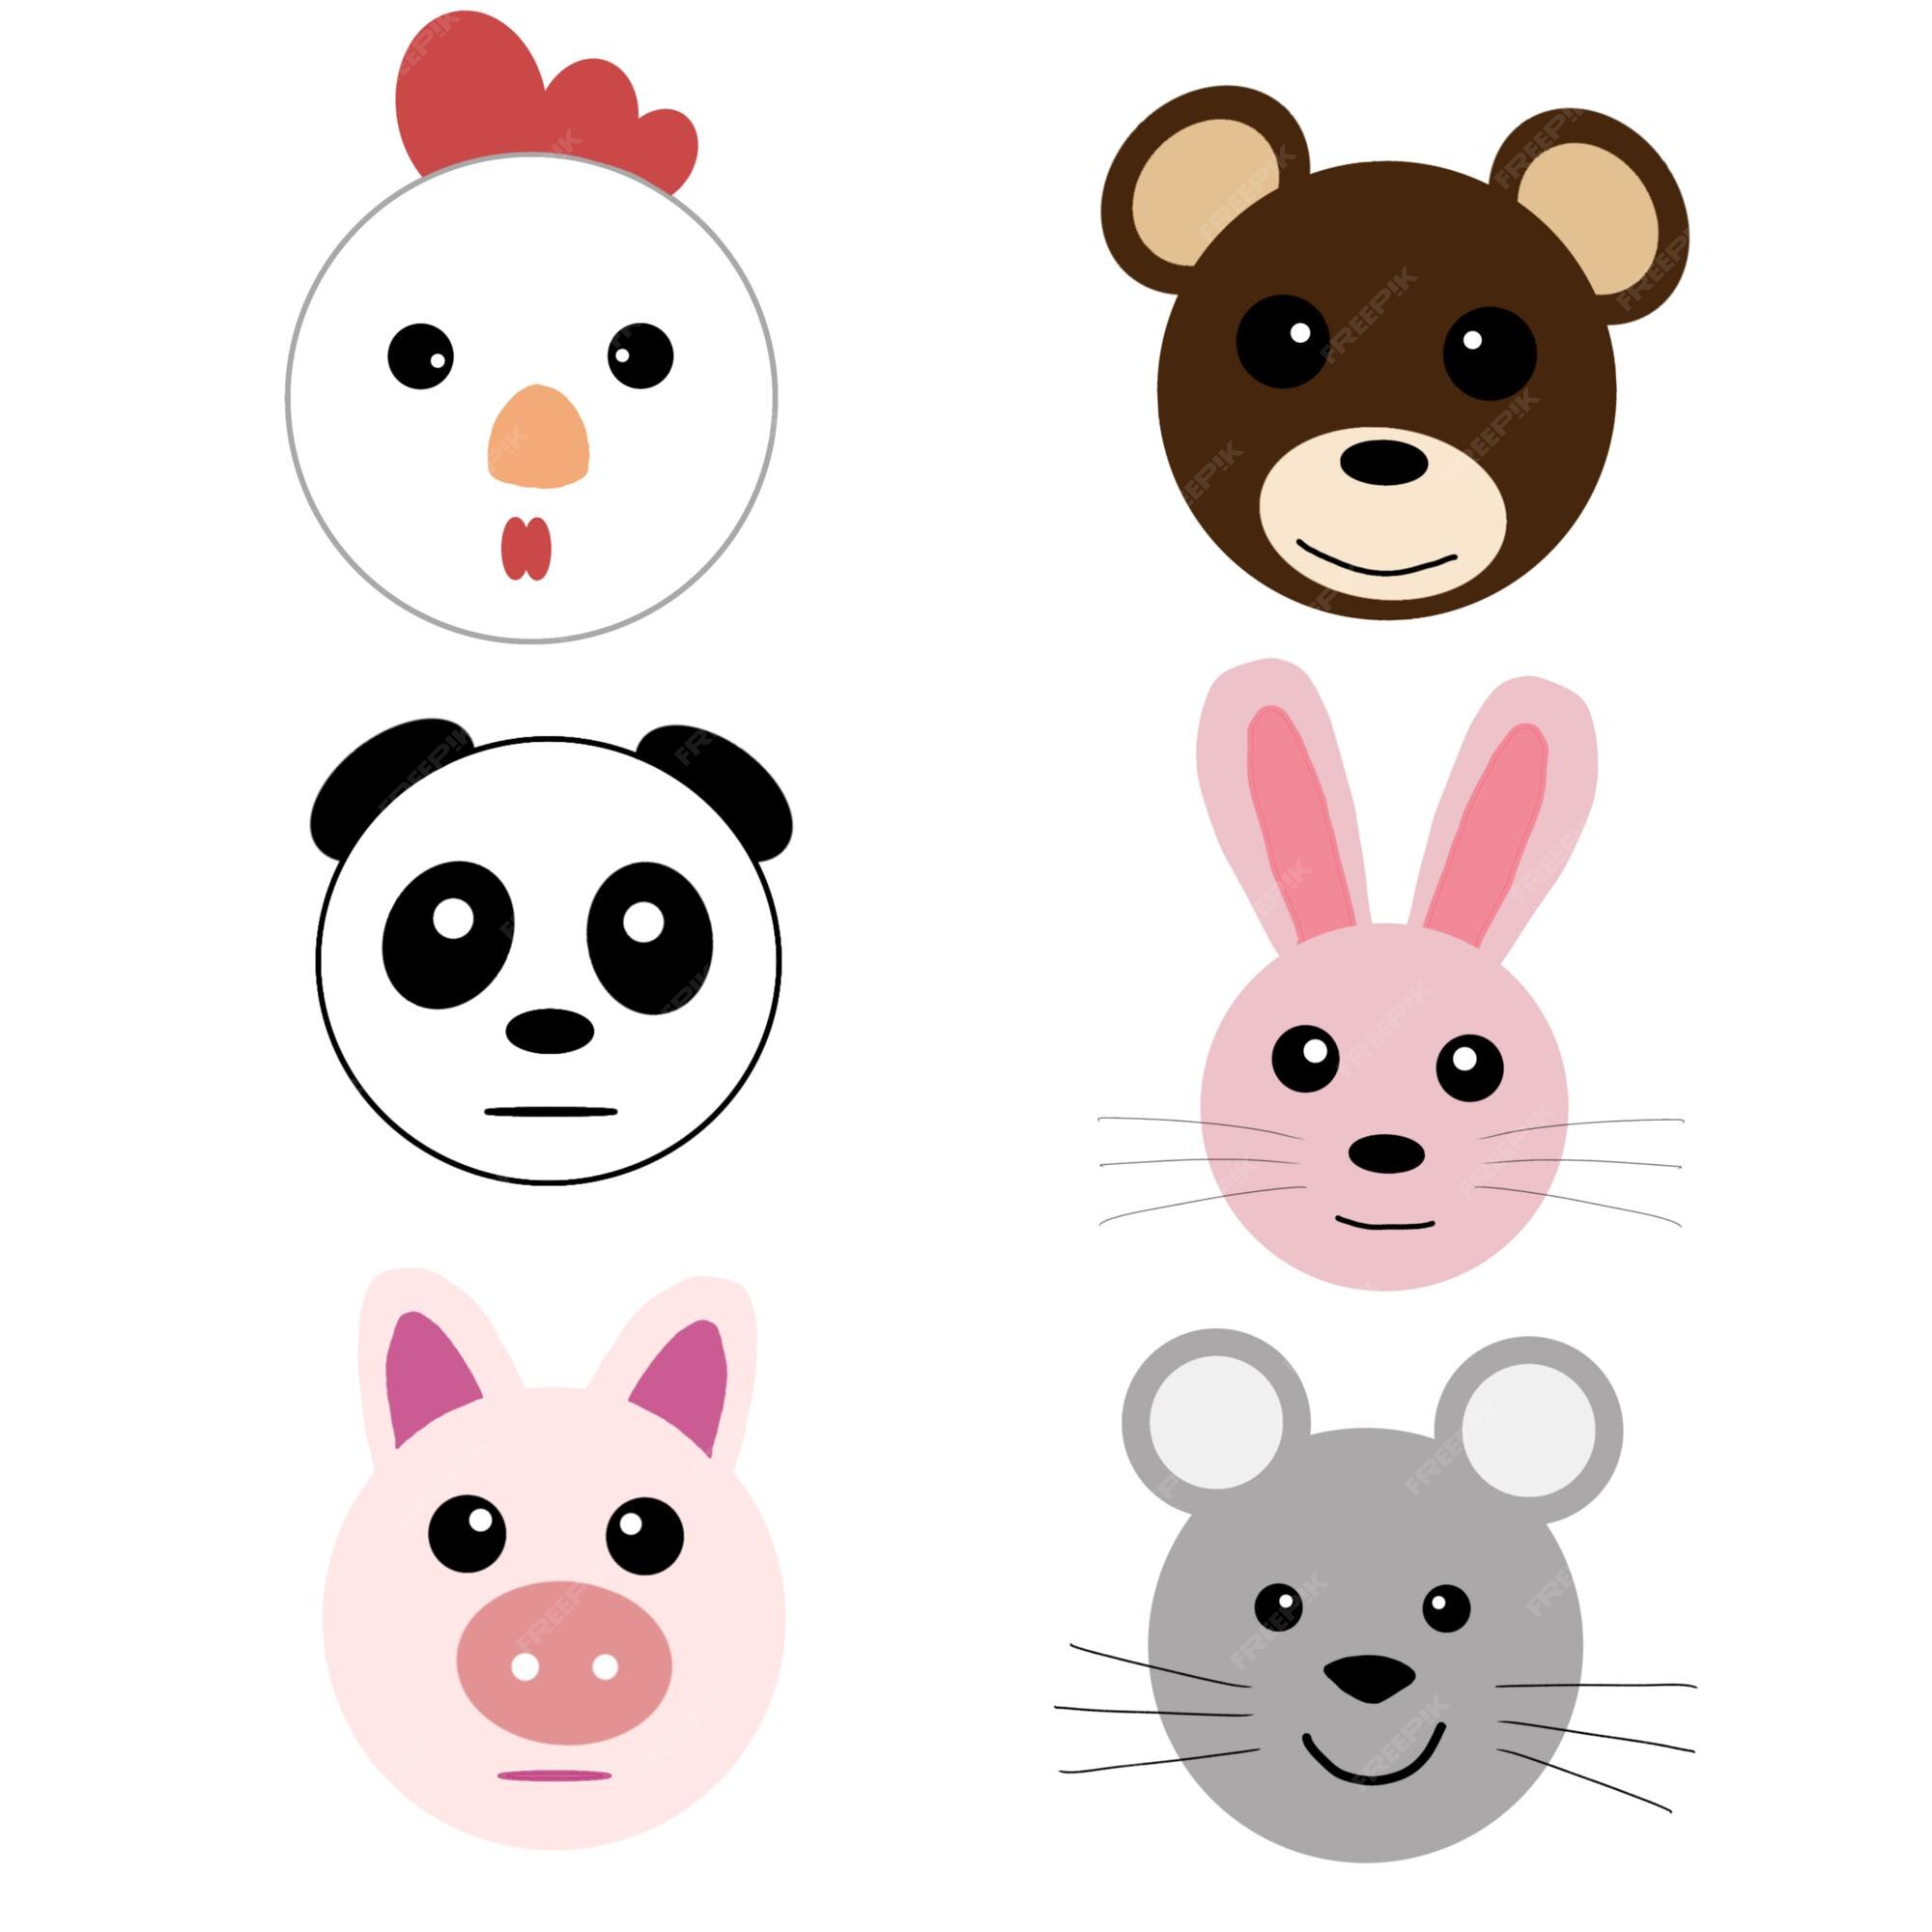 Premium Vector | Cartoon avatar from the collection of cute wild and domestic  animals.